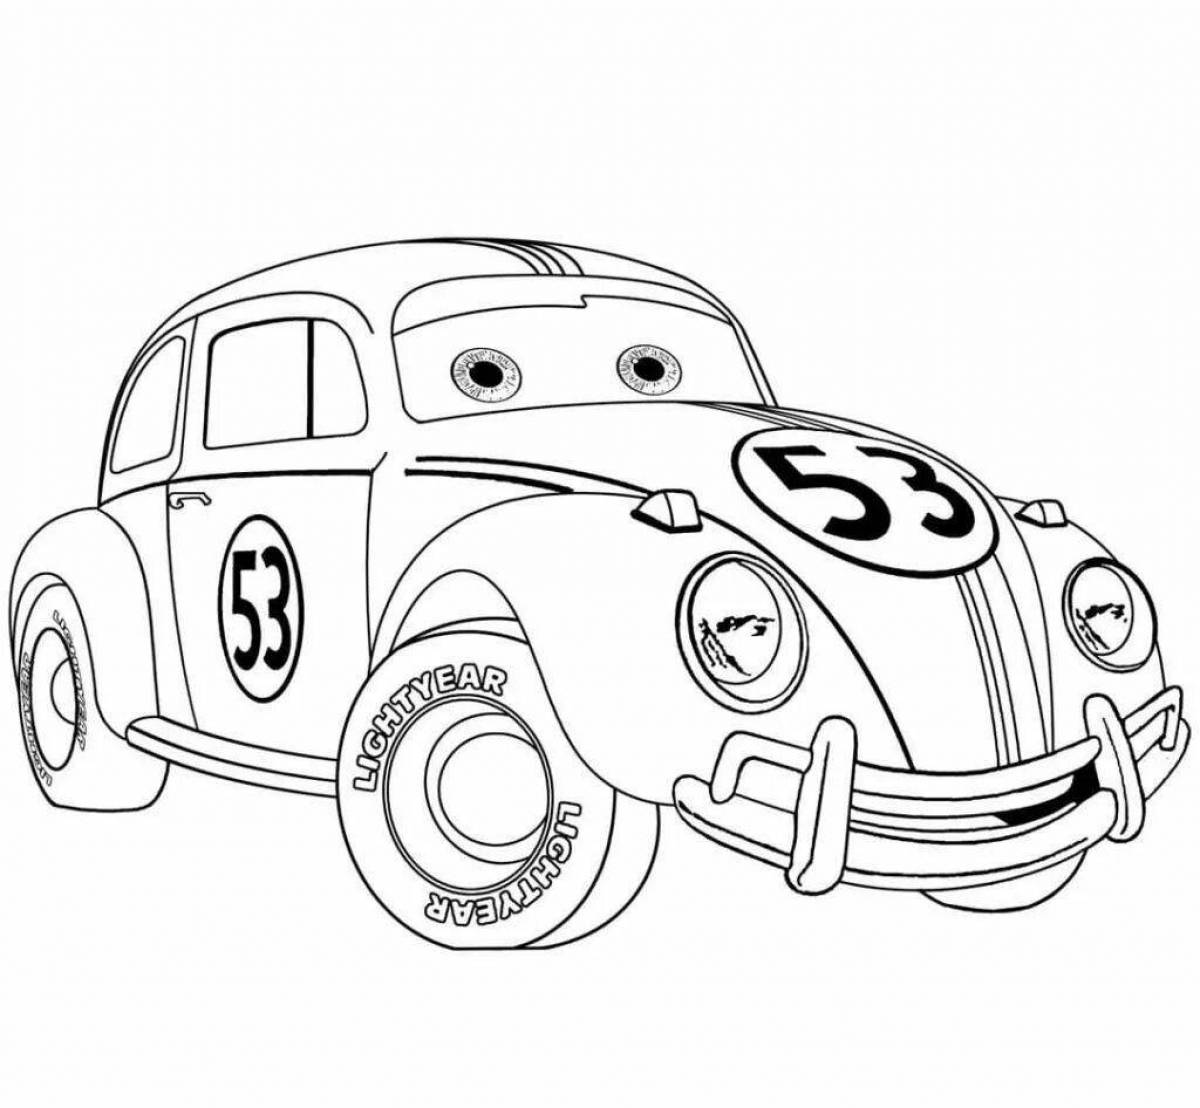 Willie car coloring book